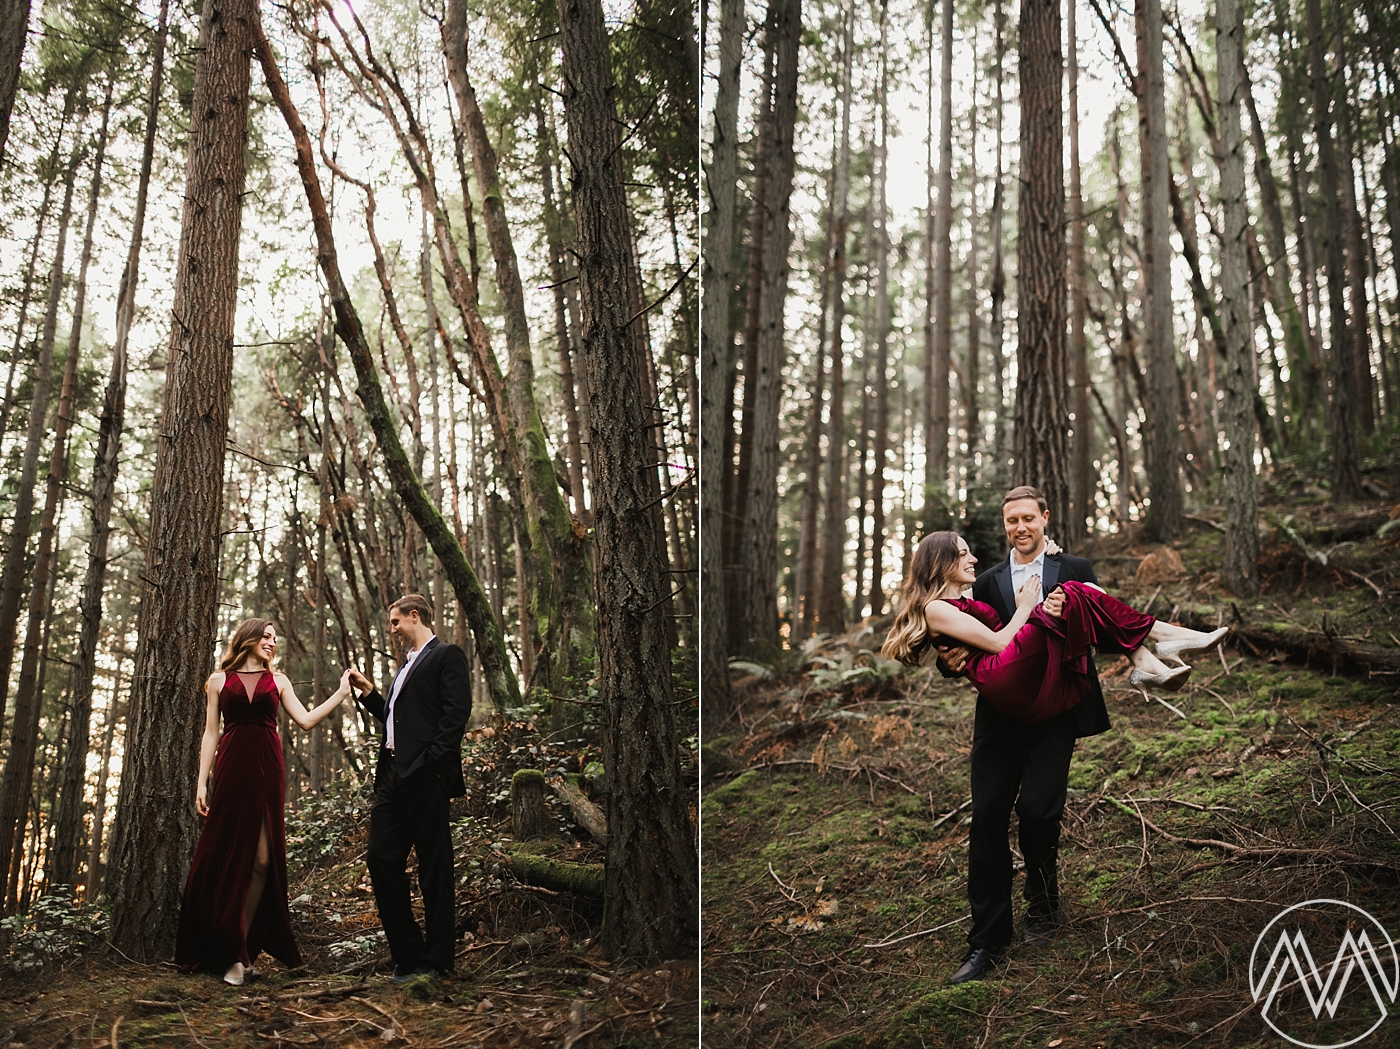 Dressy engagement photos at Point Defiance Park in Tacoma, WA | Megan Montalvo Photography